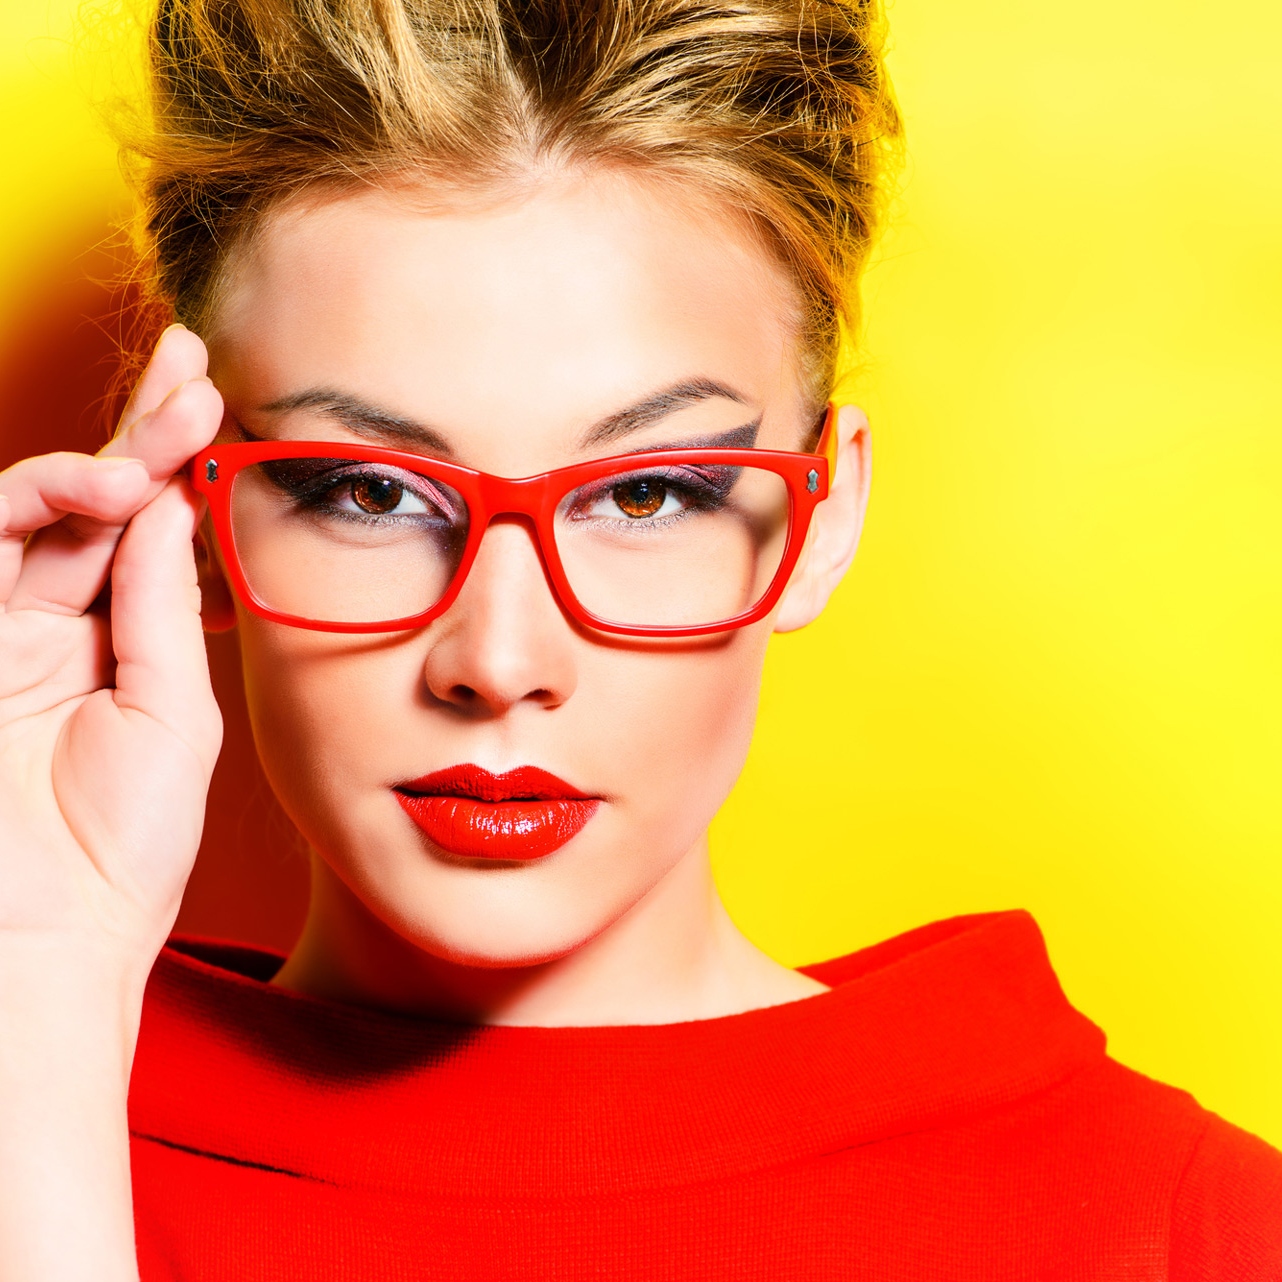 Makeup tips for women who wear glasses and contact lenses